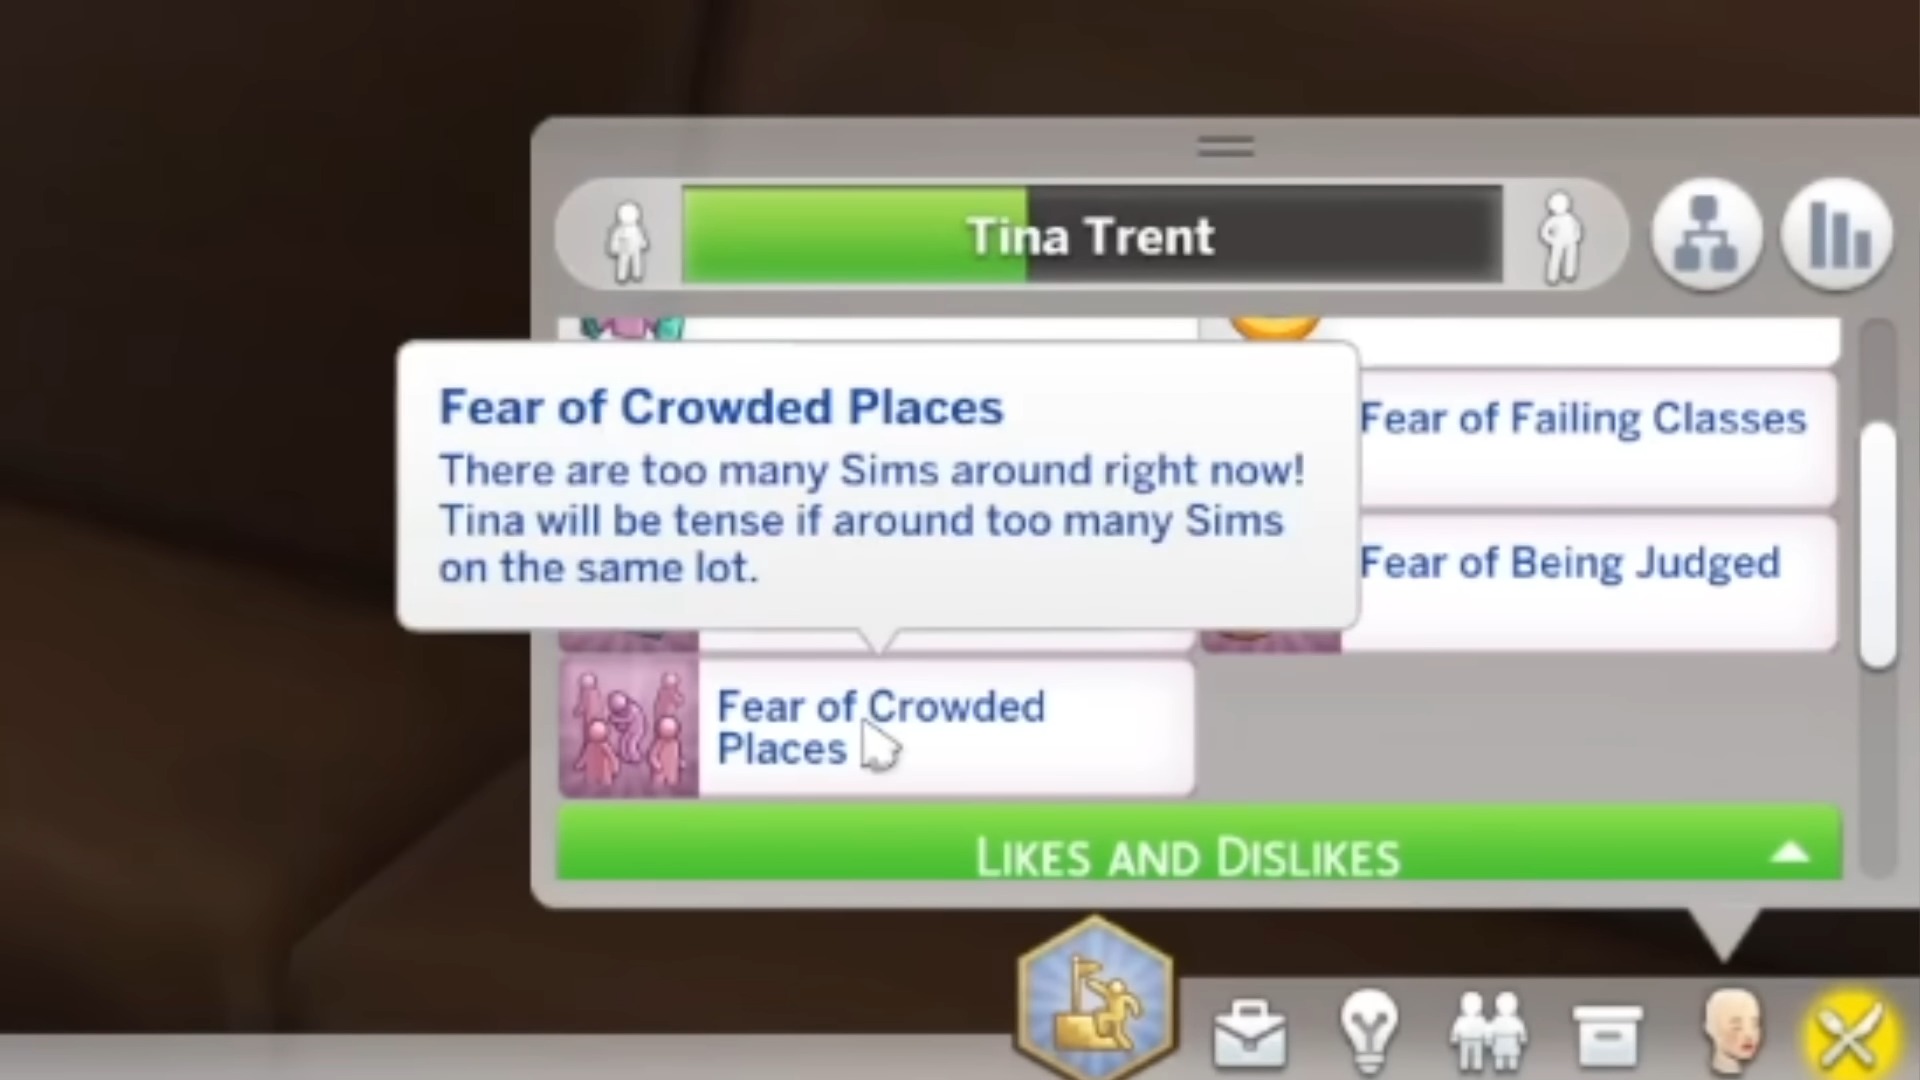 The Sims 4 High School Years Livestream - Wants and Fears (Fear of Crowded Places, Failing Classes, Being Judged, Failing Tests and More) - Screenshot from Lilsimsie's Review